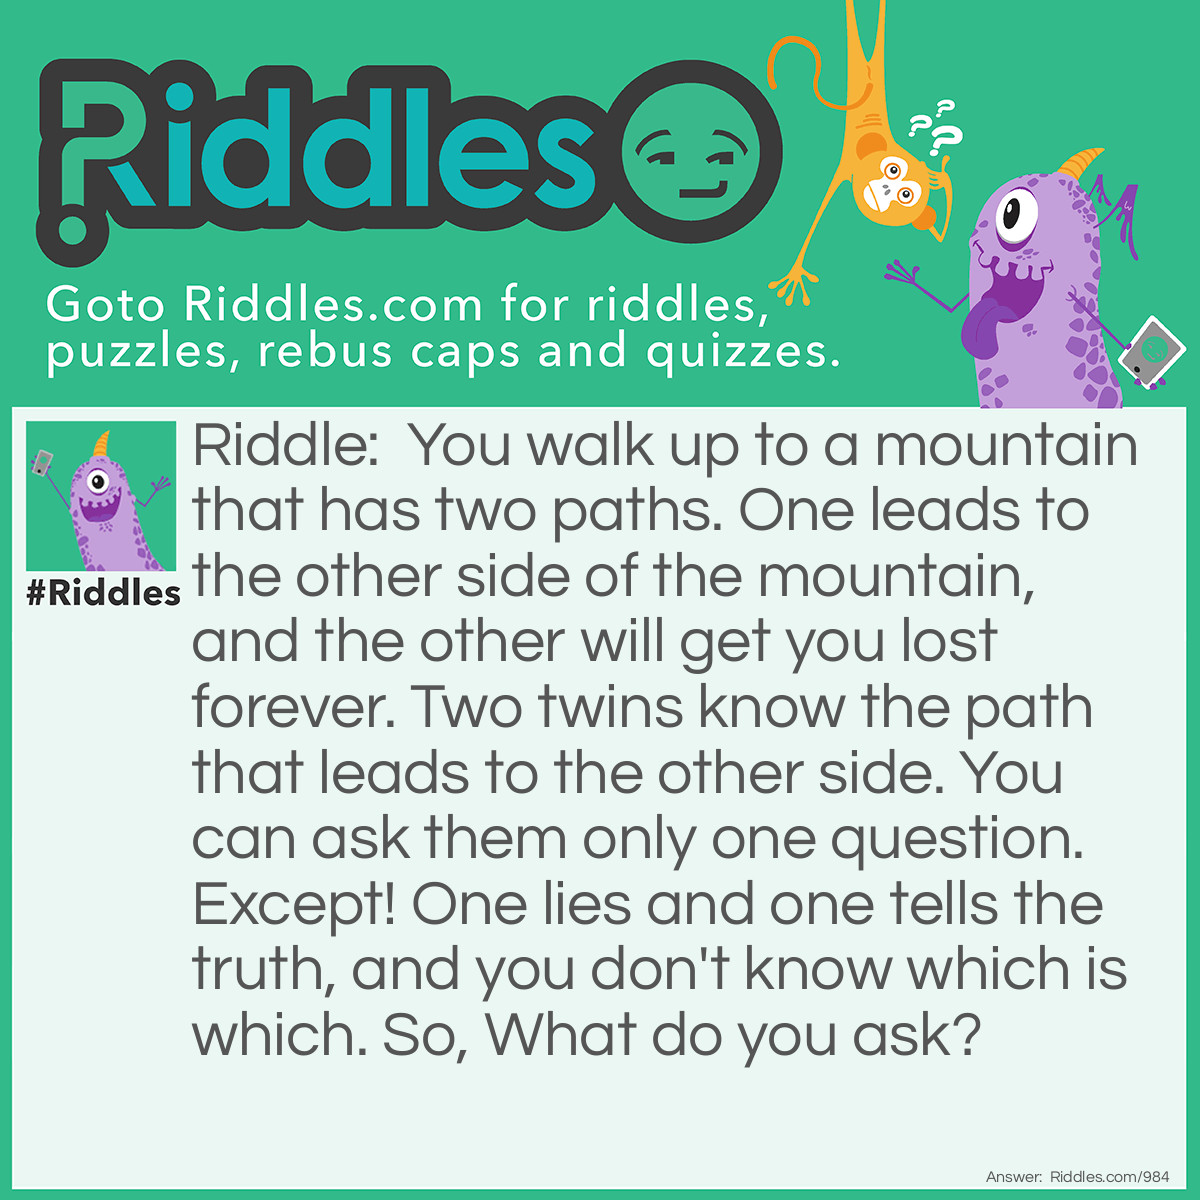 Riddle: You walk up to a mountain that has two paths. One leads to the other side of the mountain, and the other will get you lost forever. Two twins know the path that leads to the other side. You can ask them only one question. Except! One lies and one tells the truth, and you don't know which is which. So, What do you ask? Answer: You ask each twin What would your brother say?. This works because.... Well let's say the correct path is on the left side. So say you asked the liar "What would your brother say?" Well, the liar would know his brother was honest and he would say the left side, but since the liar lies, he would say right. If you asked the honest twin the same question, he would say right, because he knows his brother will lie. Therefore, you would know that the correct path was the left!